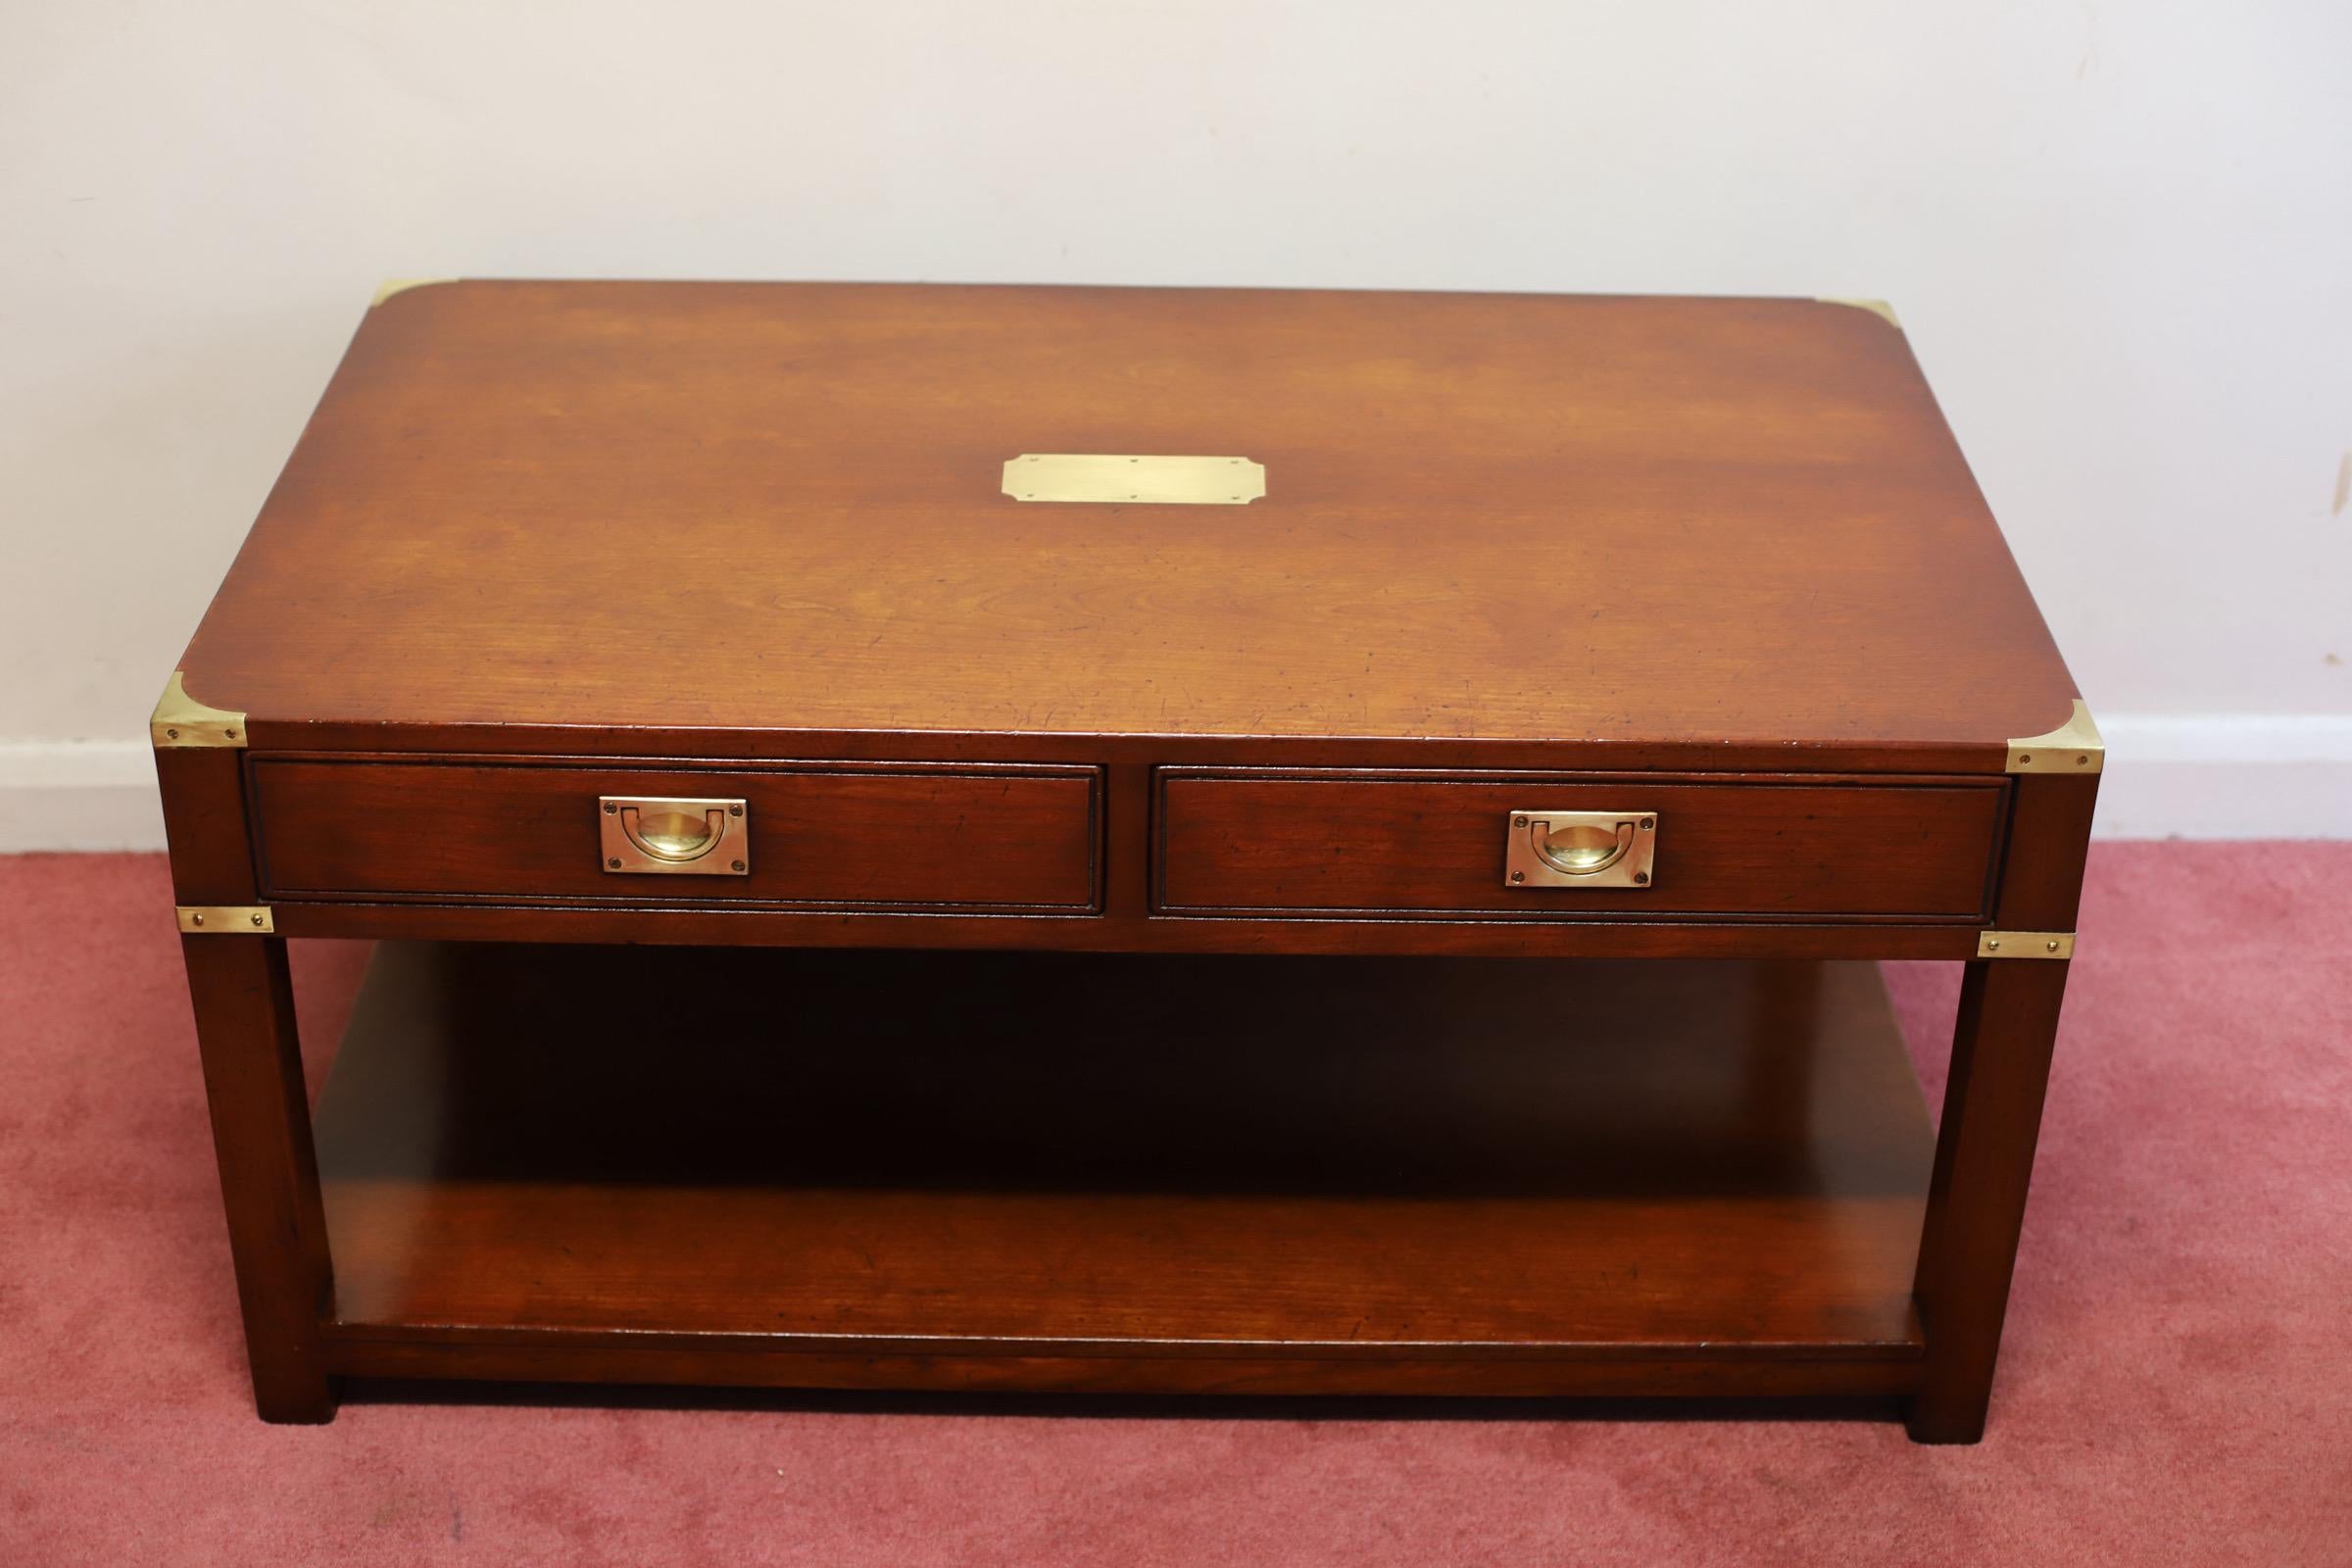 We delight to offer for sake this beautifull teak and brass mounted campaign style coffee table by C. Kennedy of Ipswich, fitted with two oak-lined drawers, in good condition.
Don't hesitate to contact me if you have any questions.
Please have a